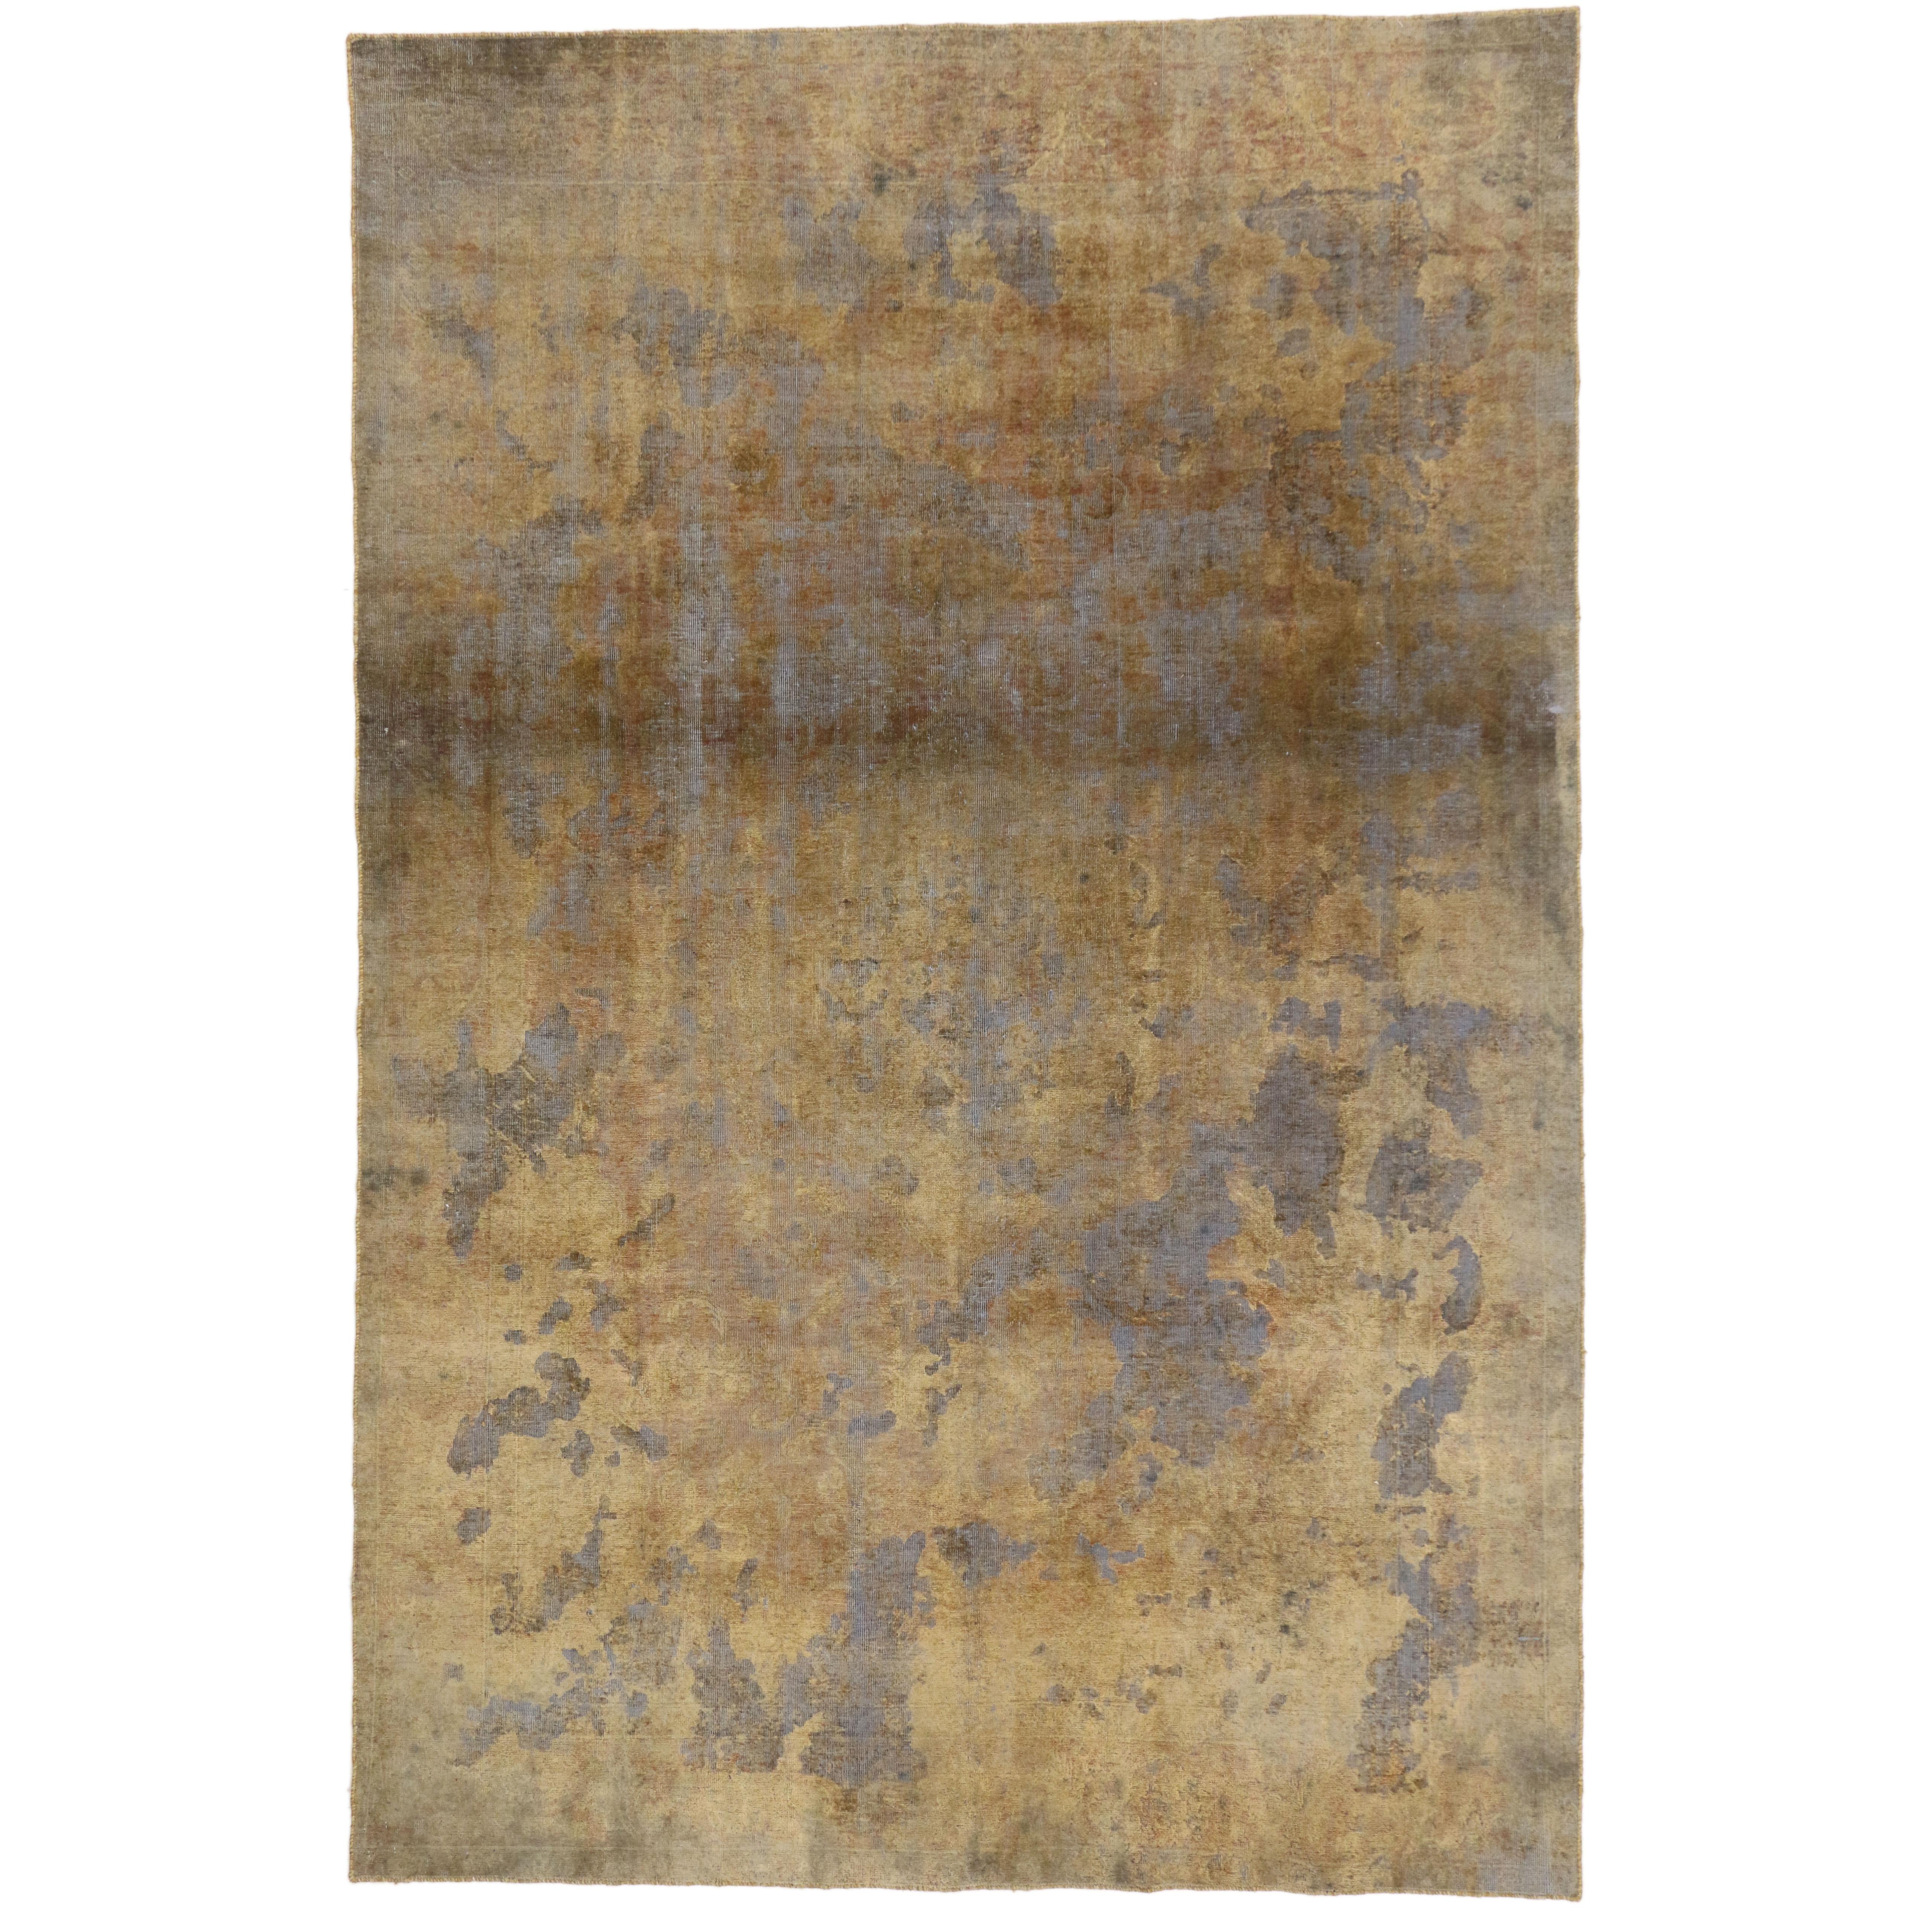 Warm, Neutral Color Distressed Vintage Turkish Rug with Industrial Luxe Style